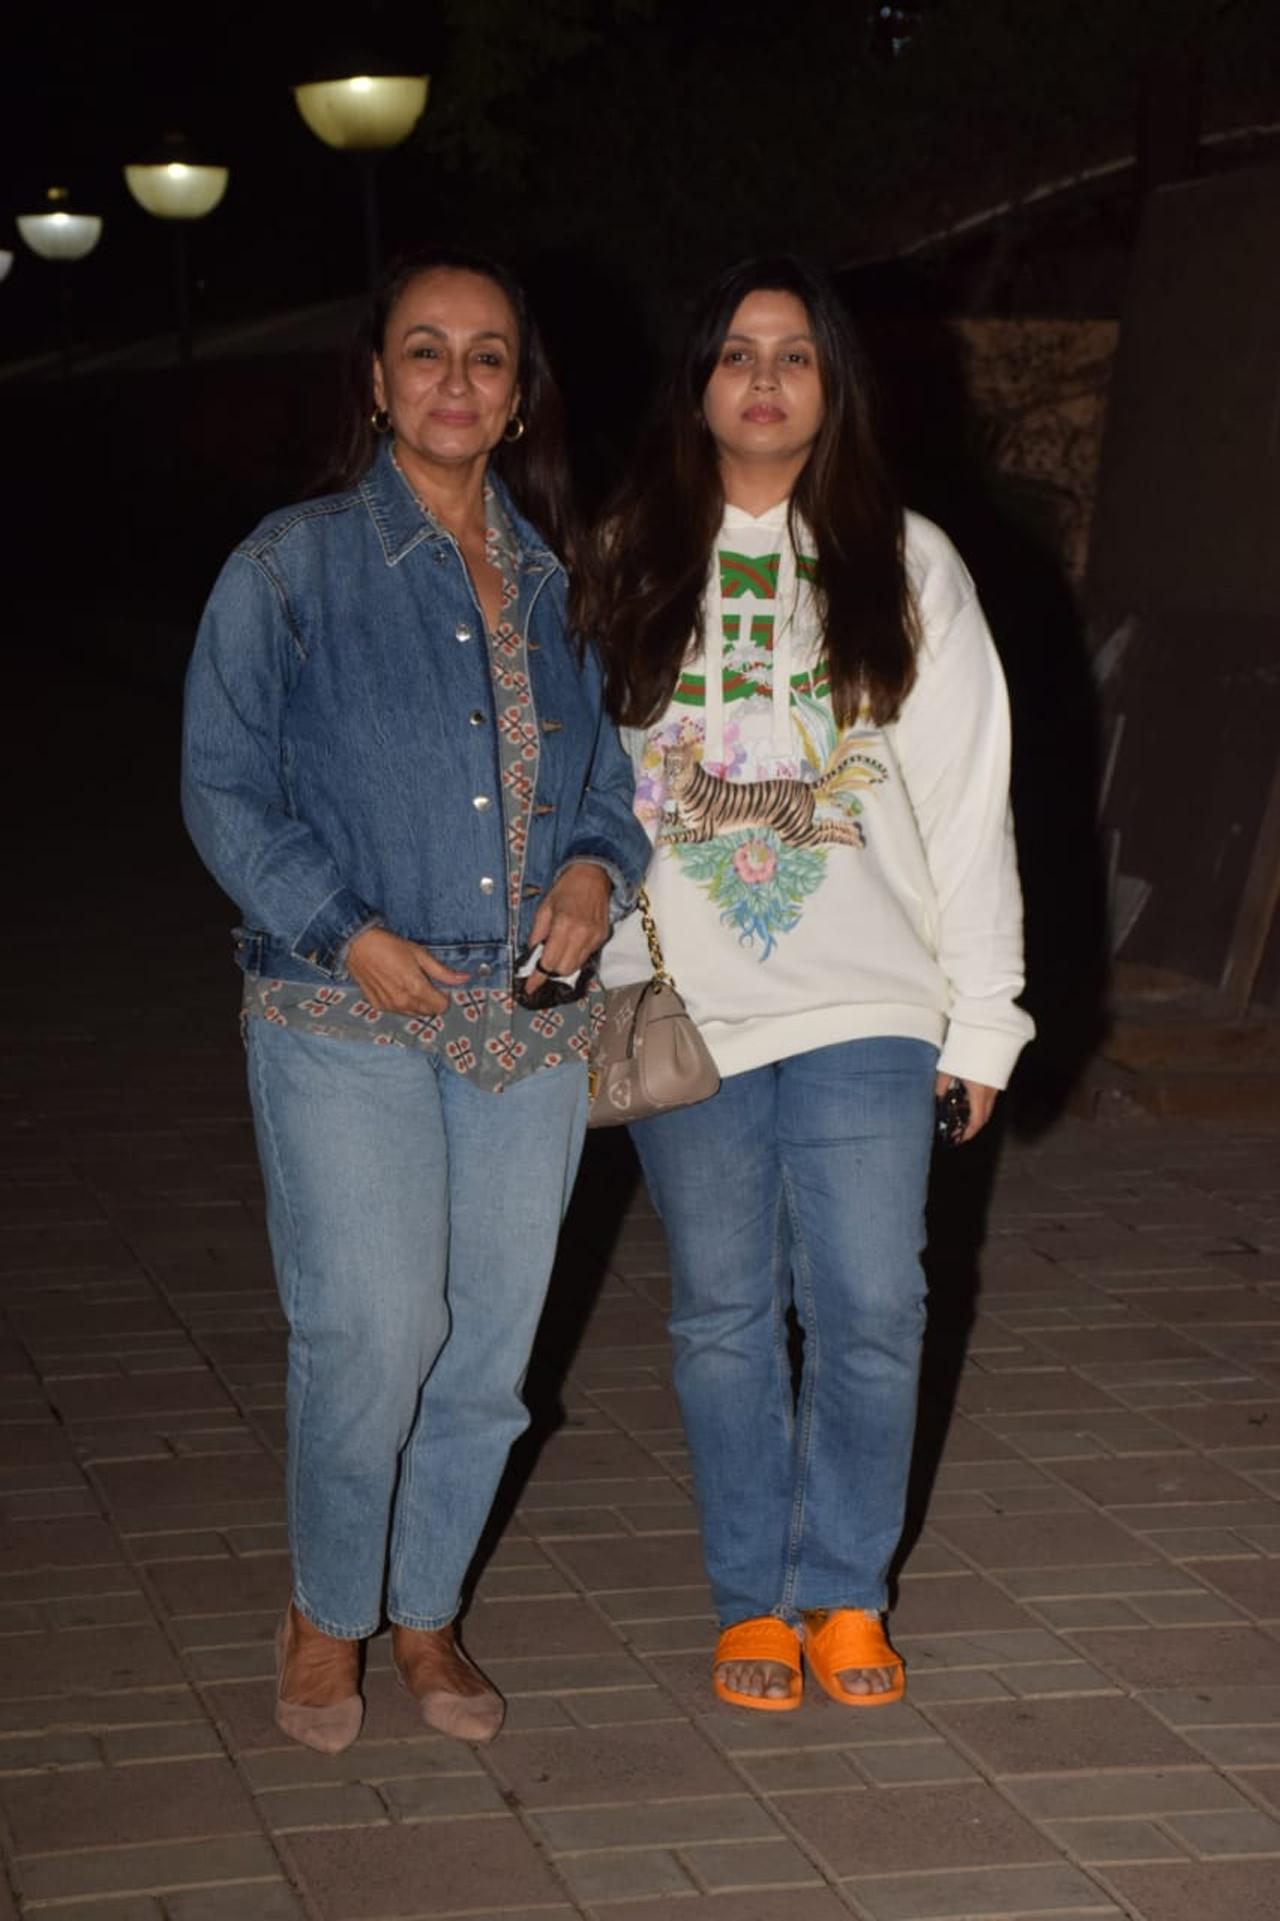 Soni Razdan posed with her daughter Shaheen Bhatt as they attended the special show of Gehraiyaan.